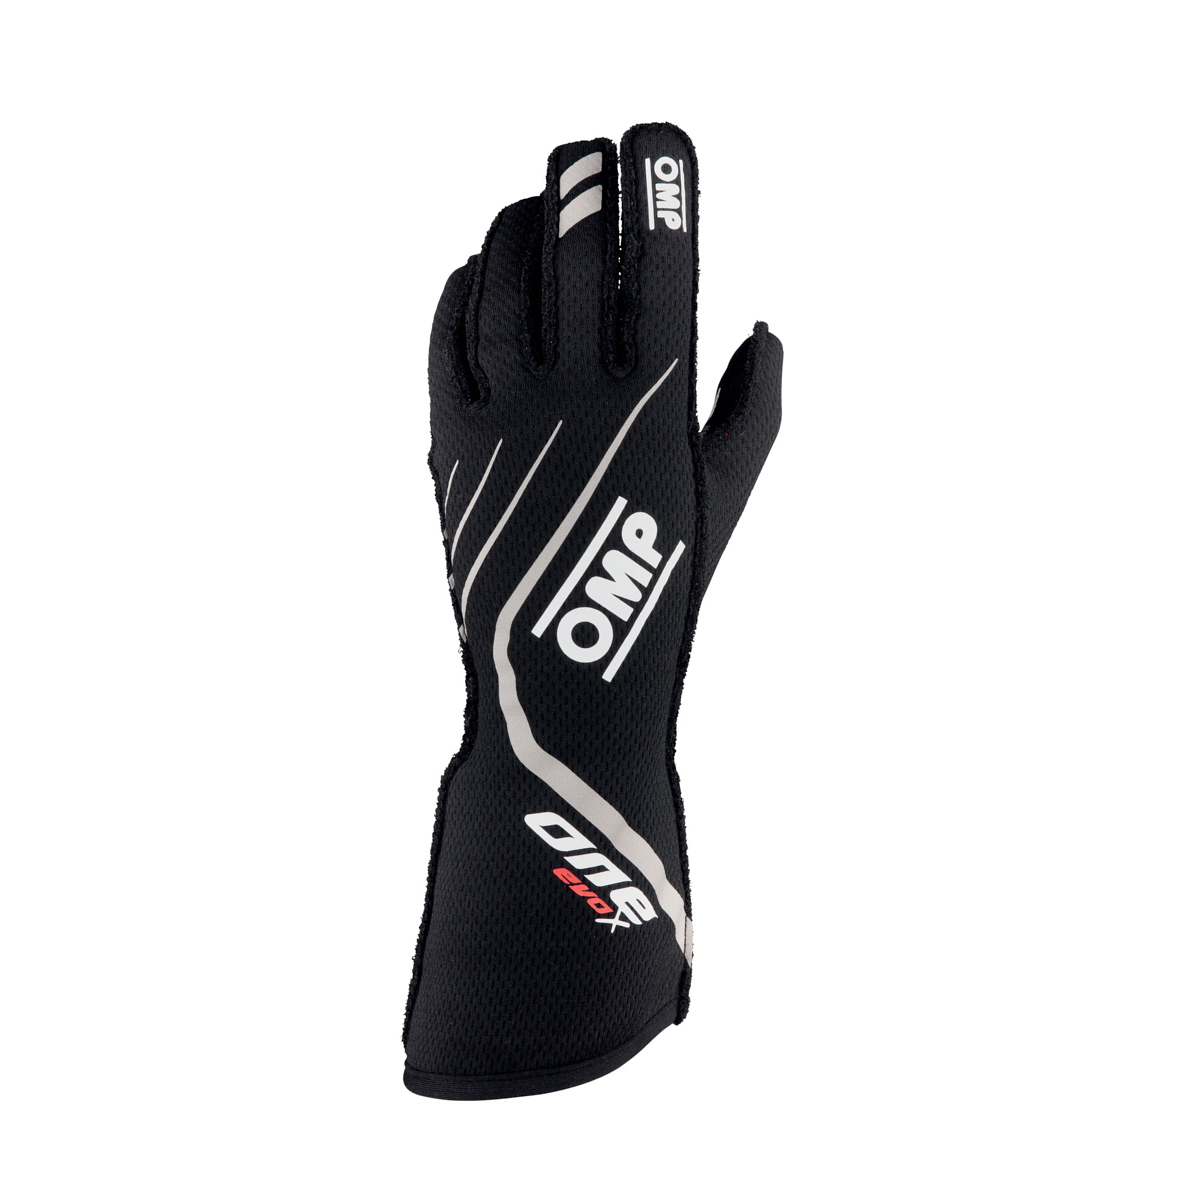 OMP Racing IB771NS Driving Gloves, One EVO X, FIA Approved, Double Layer, Fire Retardant Fabric, Black, Small, Pair